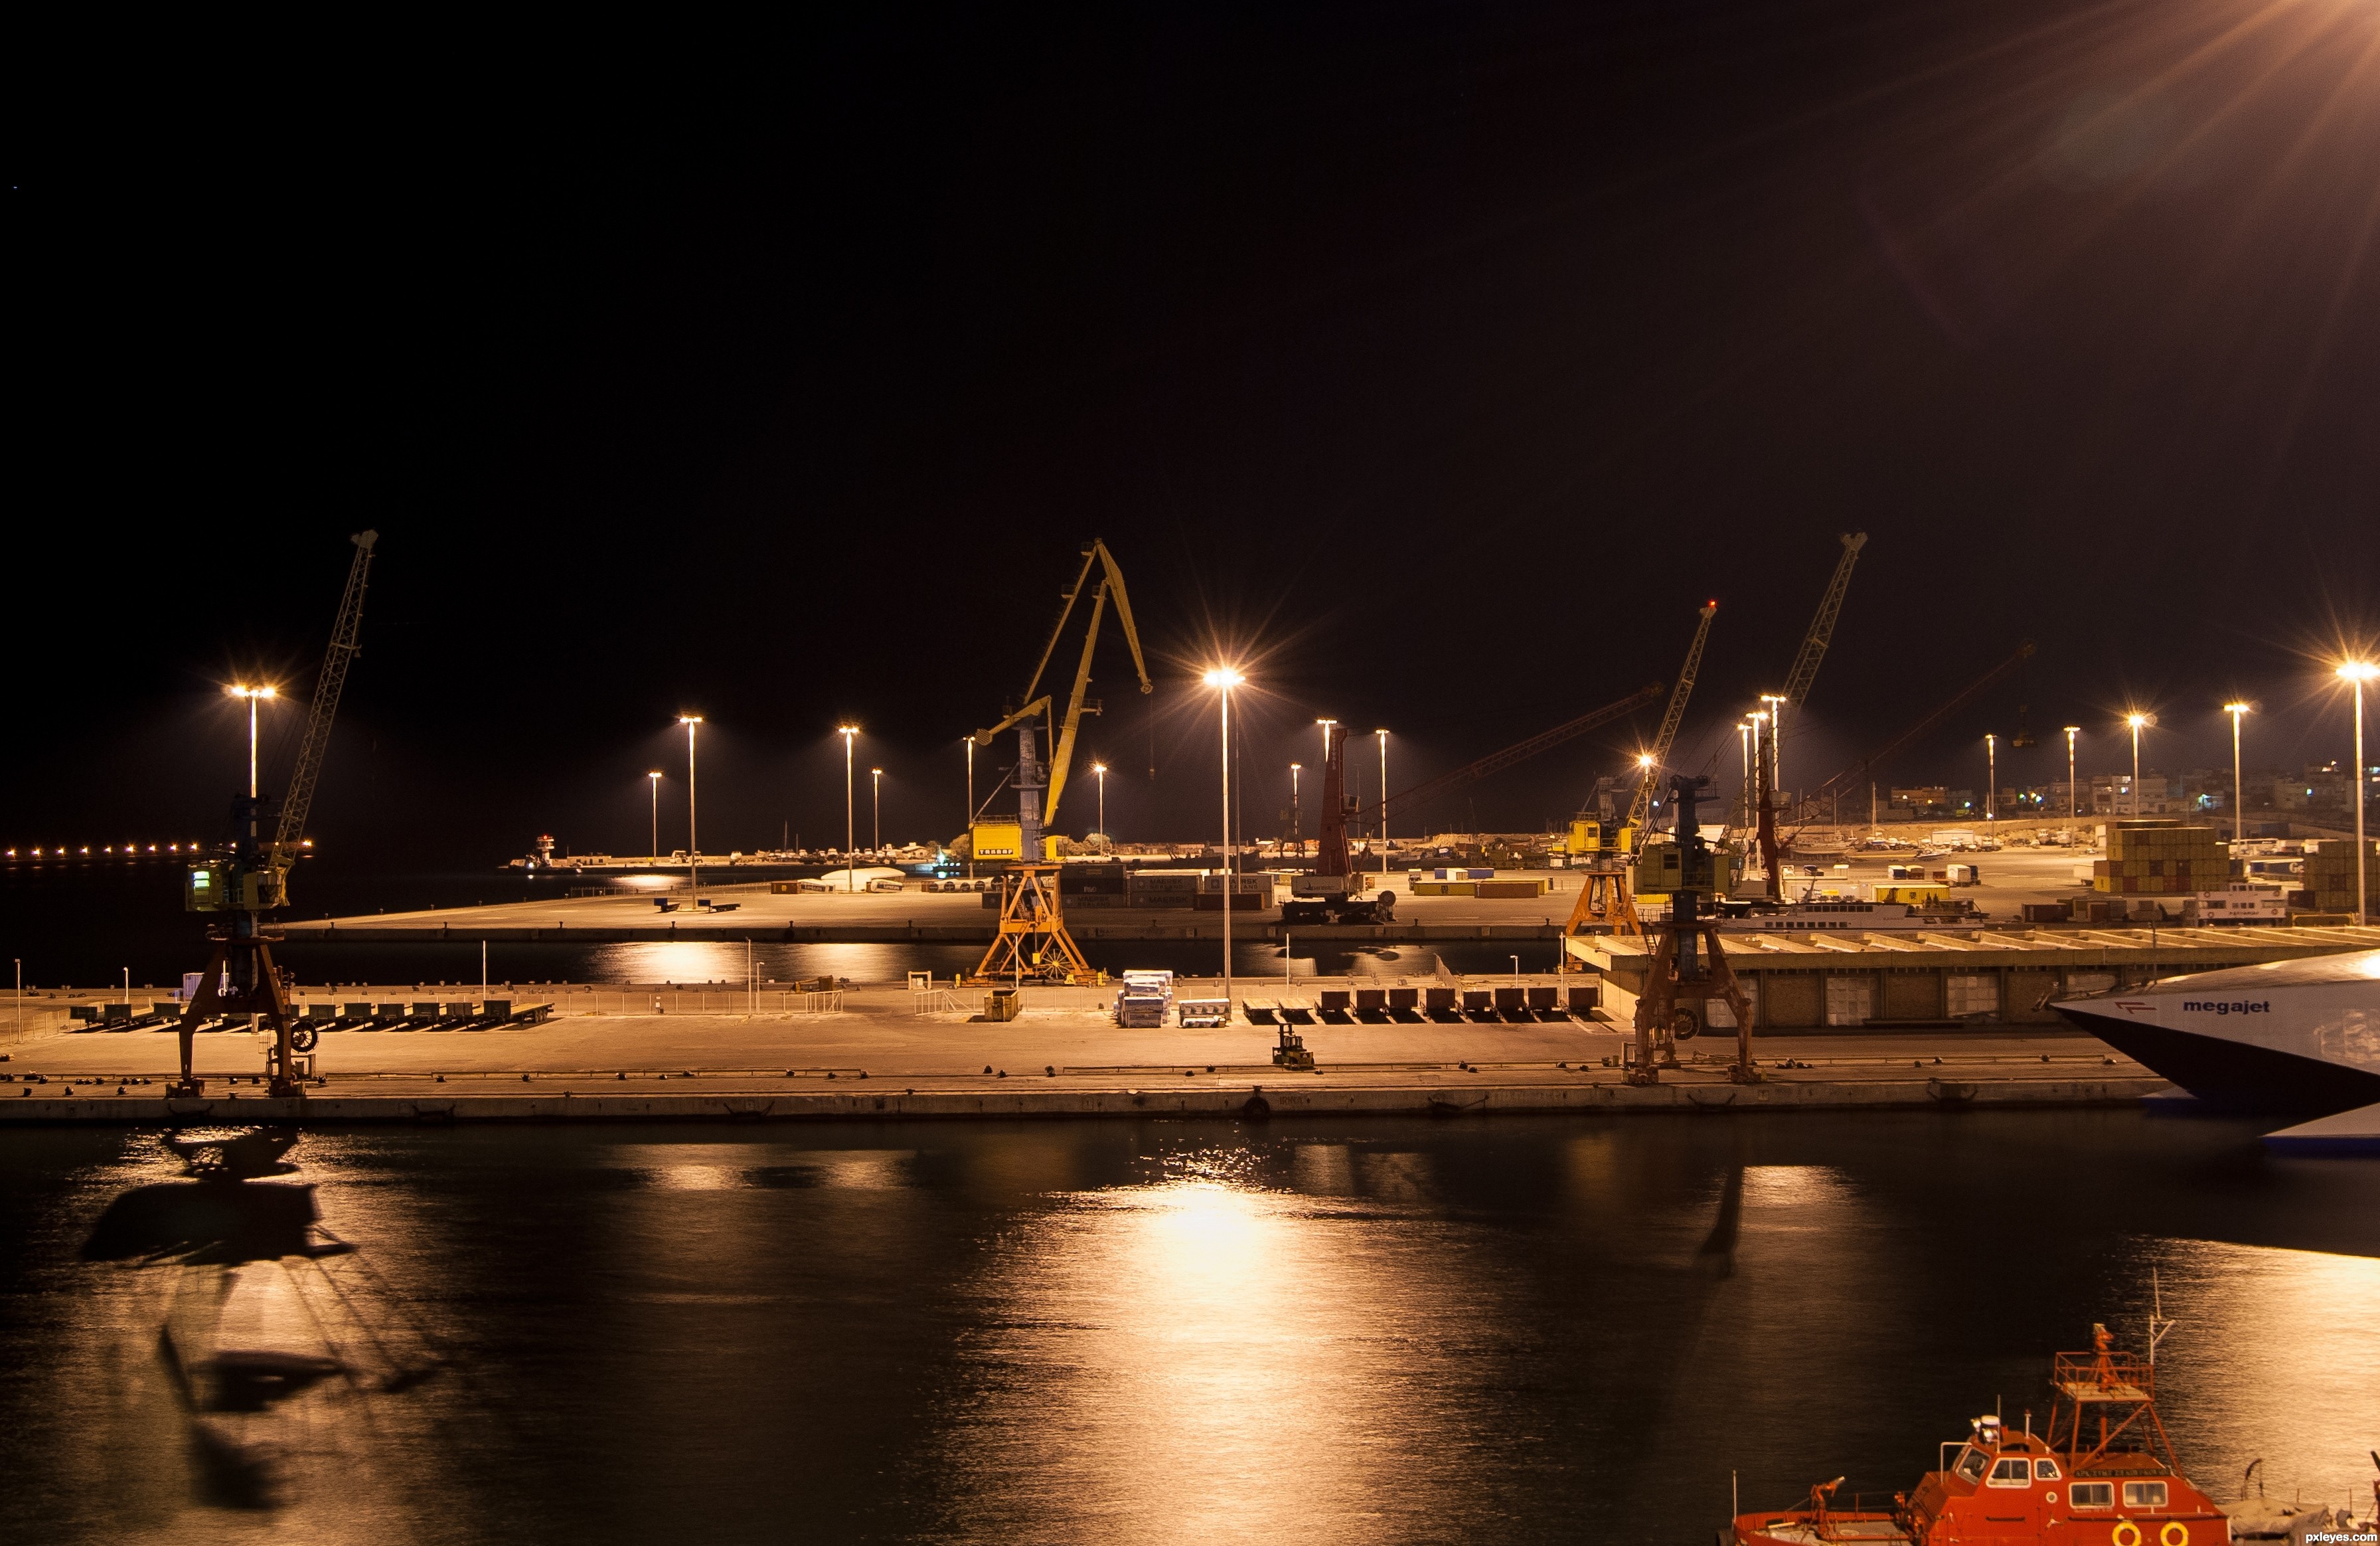 Port by night picture, by roon for: long exposure night photography ...